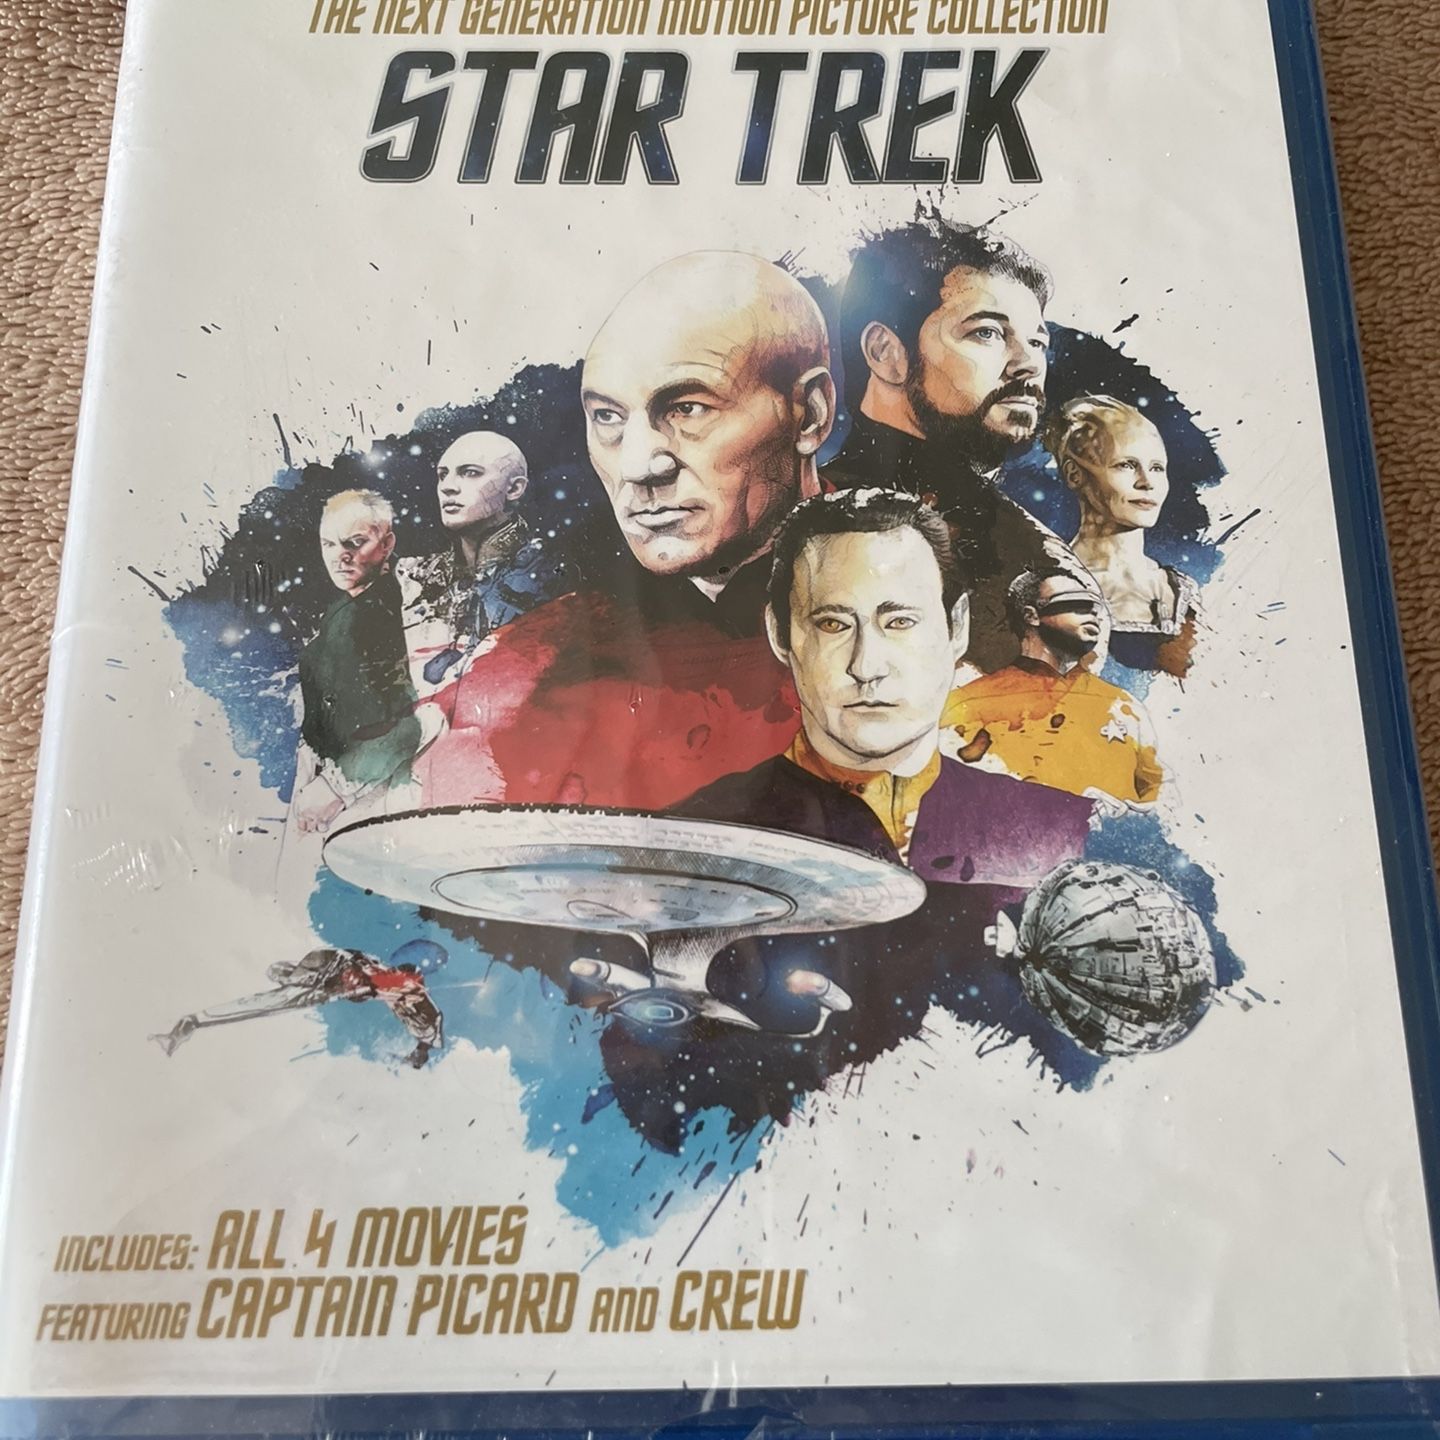 Star Trek The Next Generation Motion Picture Collection